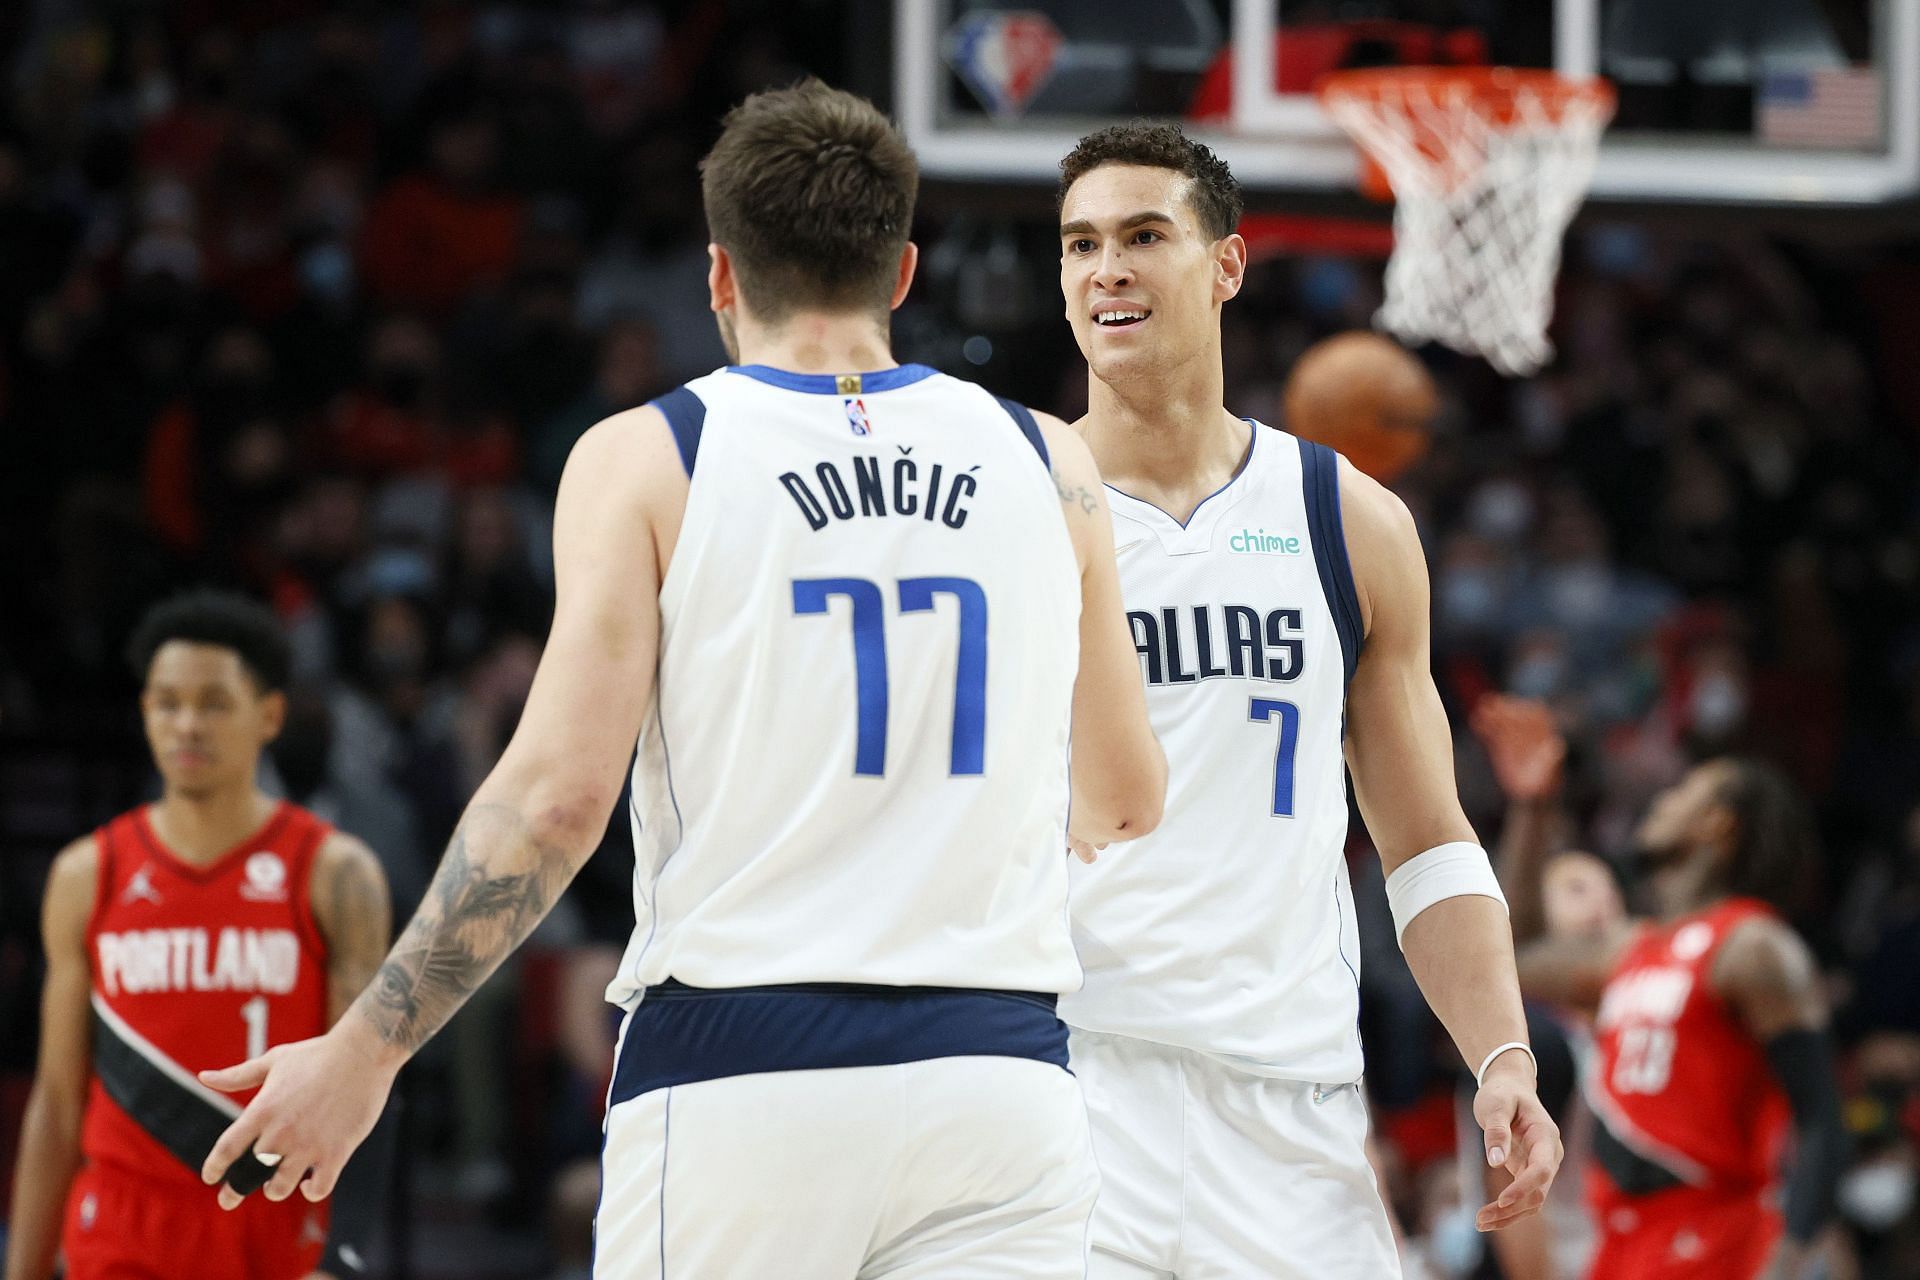 Luka Doncic and Dwight Powell of the Dallas Mavericks